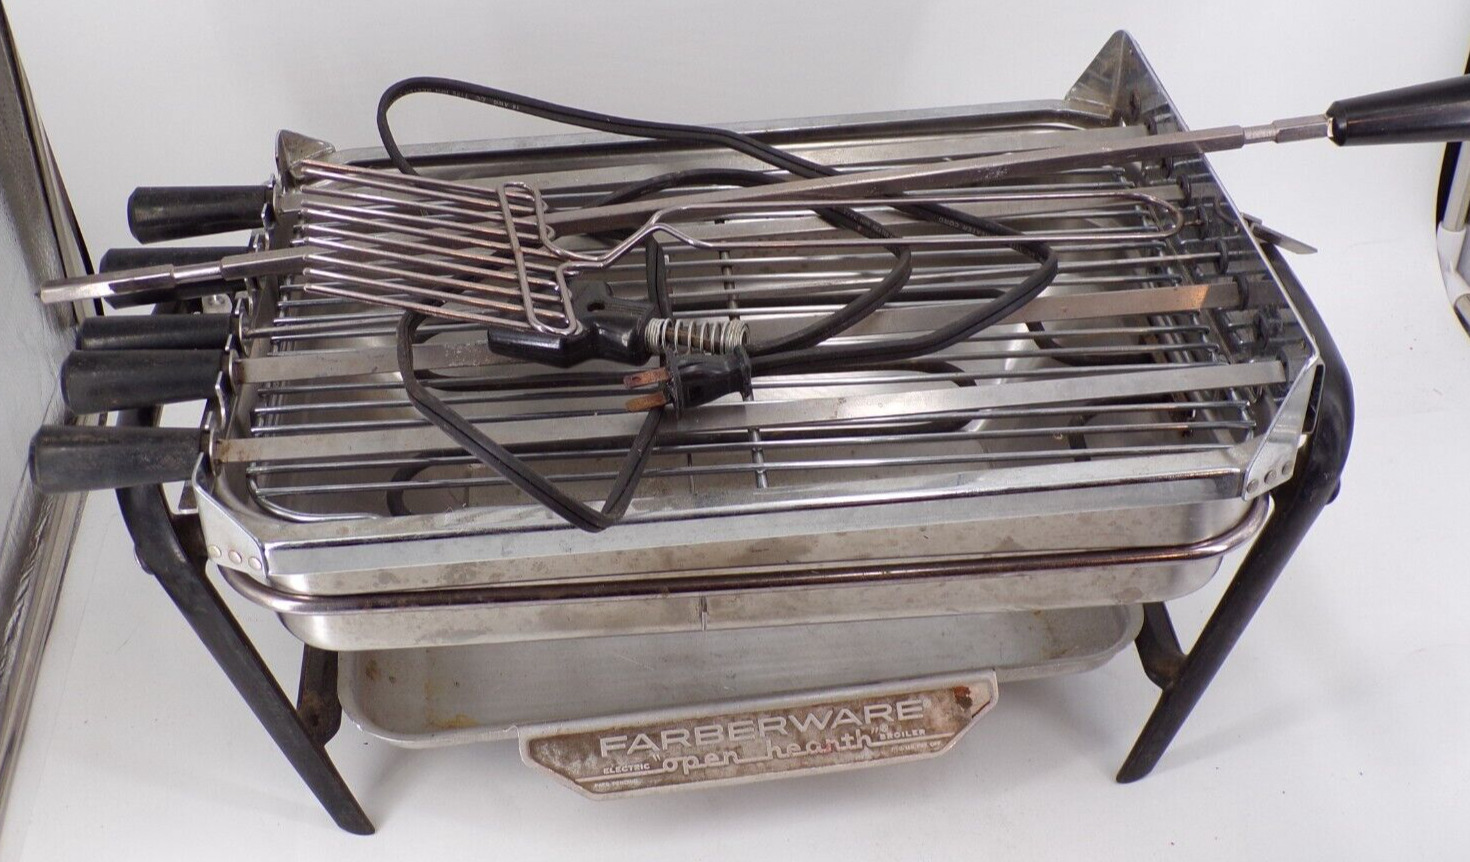 VTG Farberware The Open Hearth Electric Broiler Indoor Grill with Shish Kebab